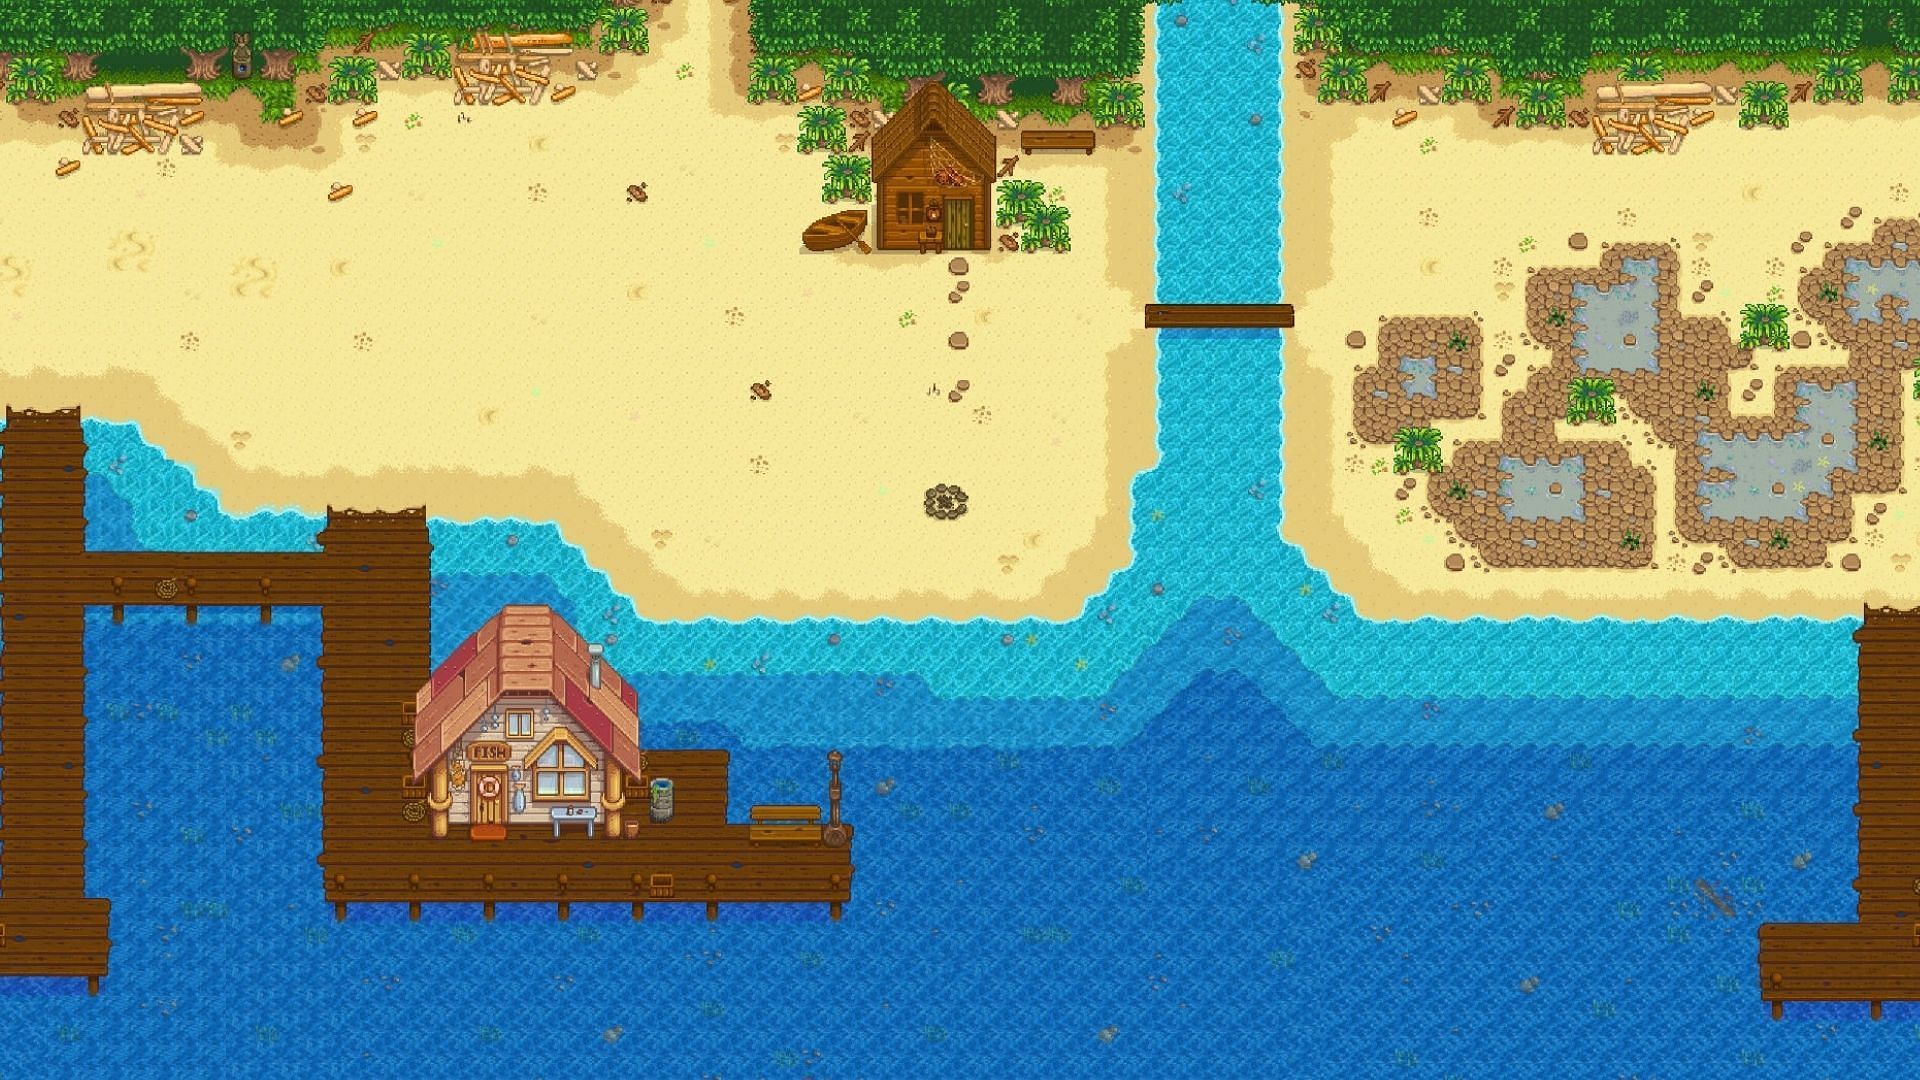 These fishes can be found on the south beach of Pelican Town during rainy days. (Image via ConcernedApe)